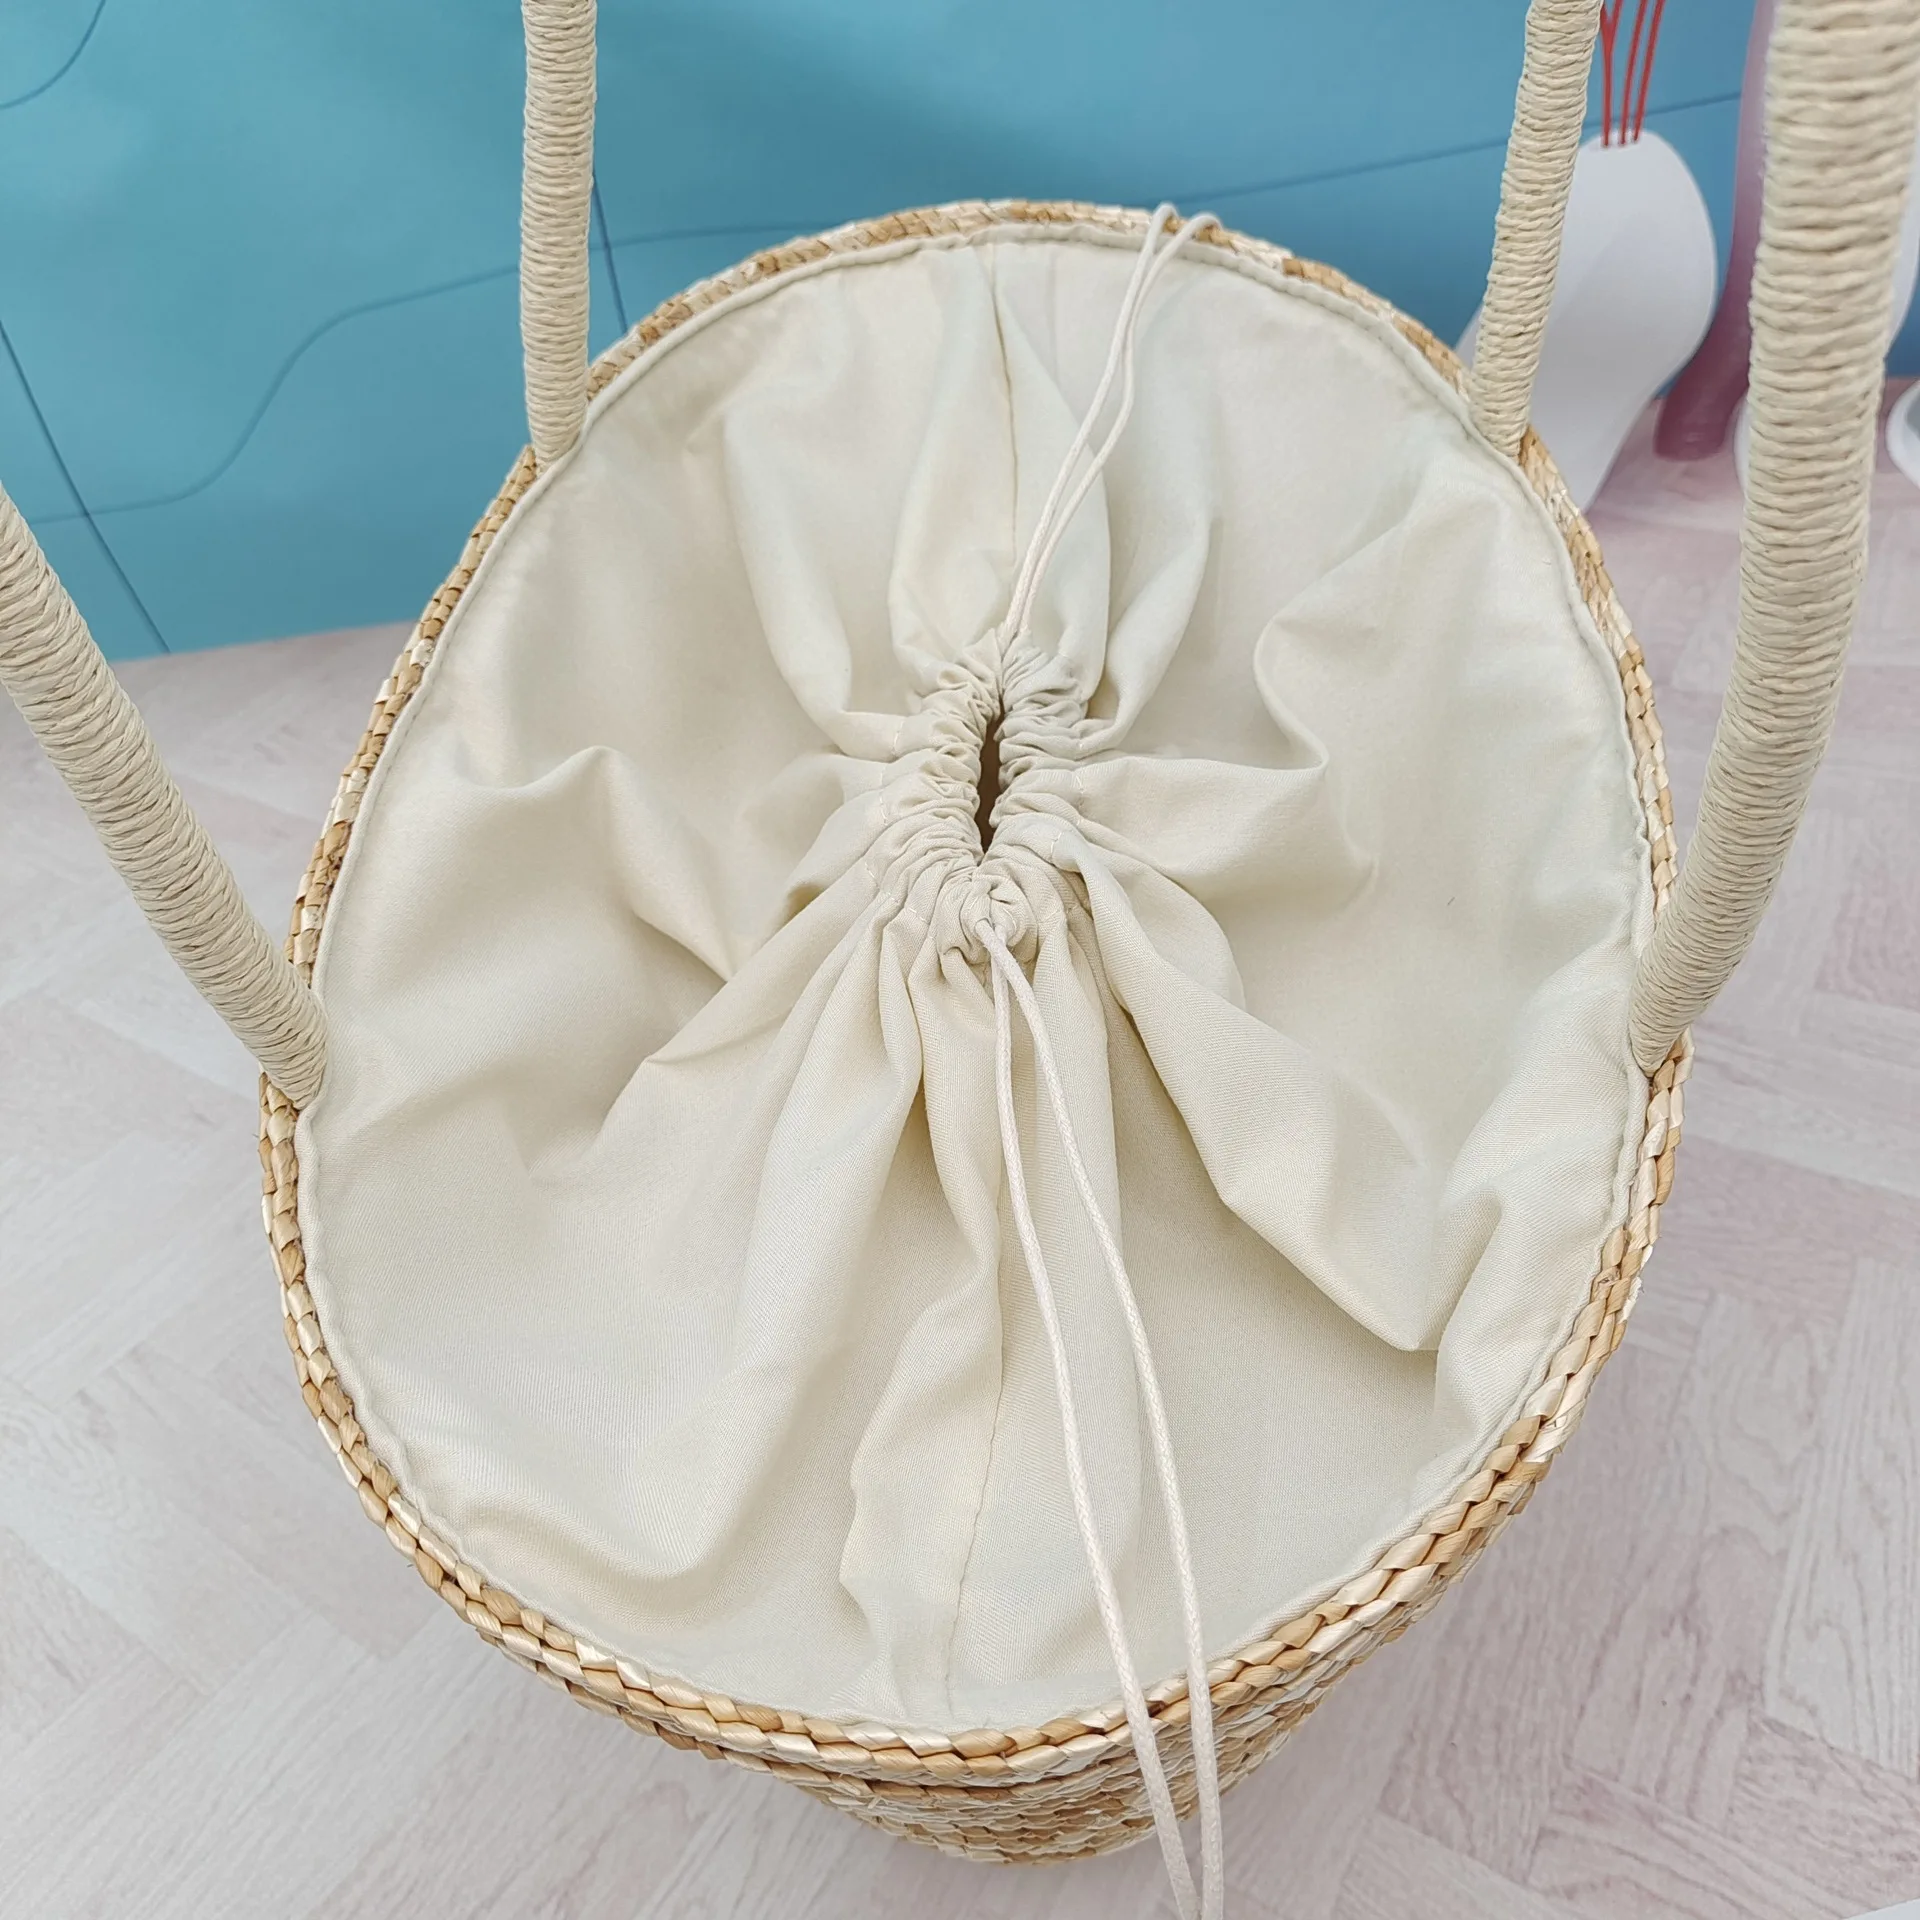 Natural straw woven bag Leisure Travel Tote Hand embroidered women's shoulder bag Beach bag